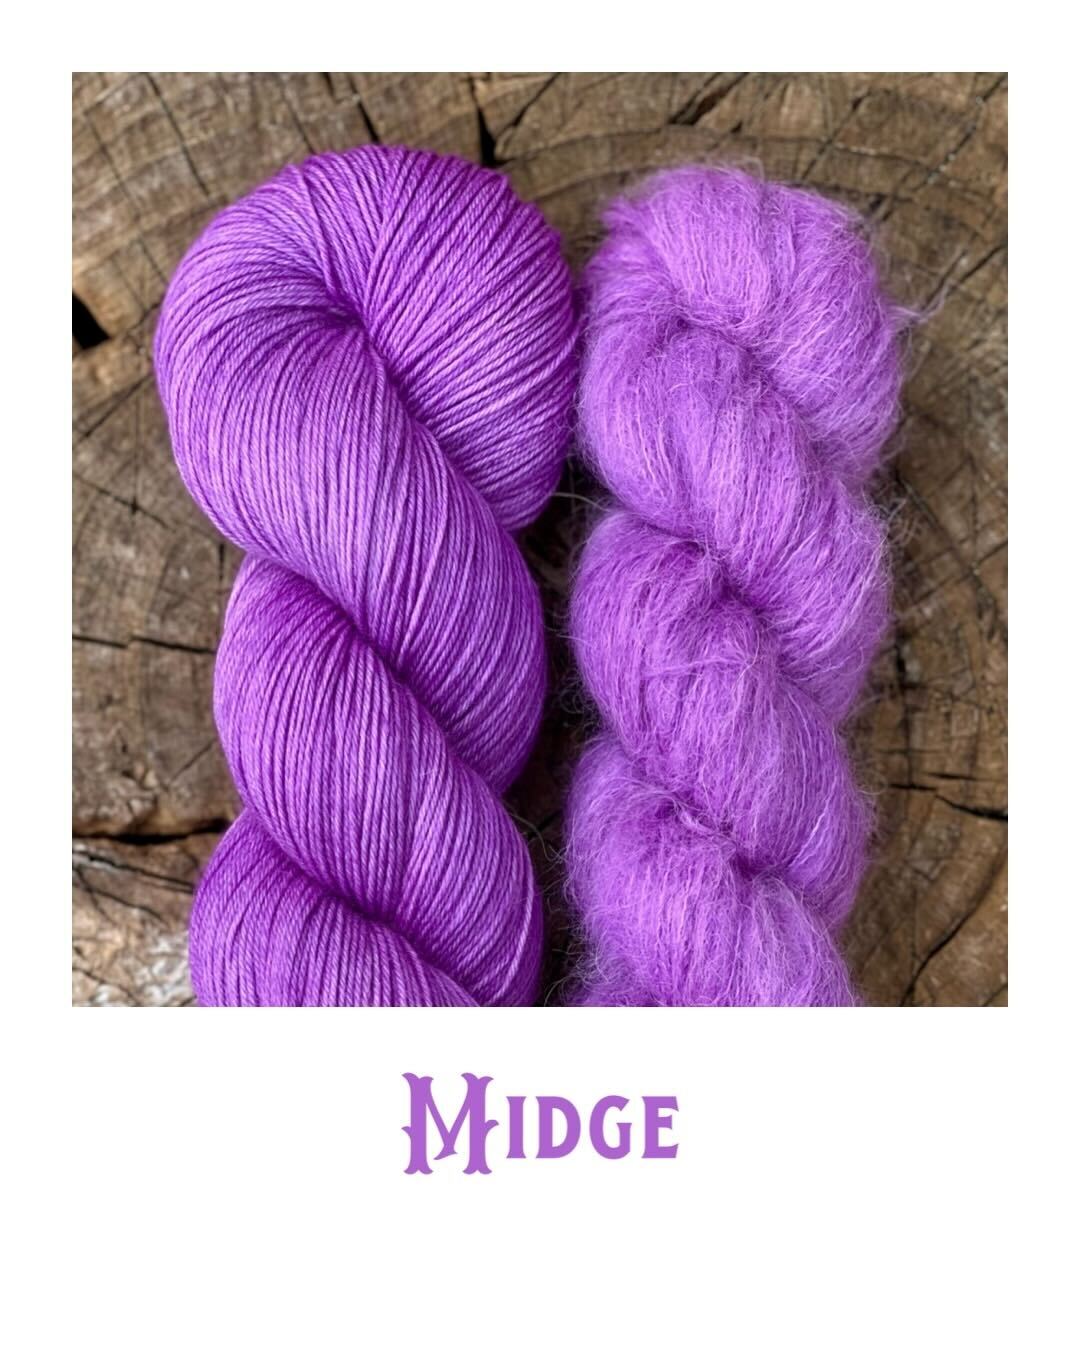 Downy Worsted: Hand Dyed